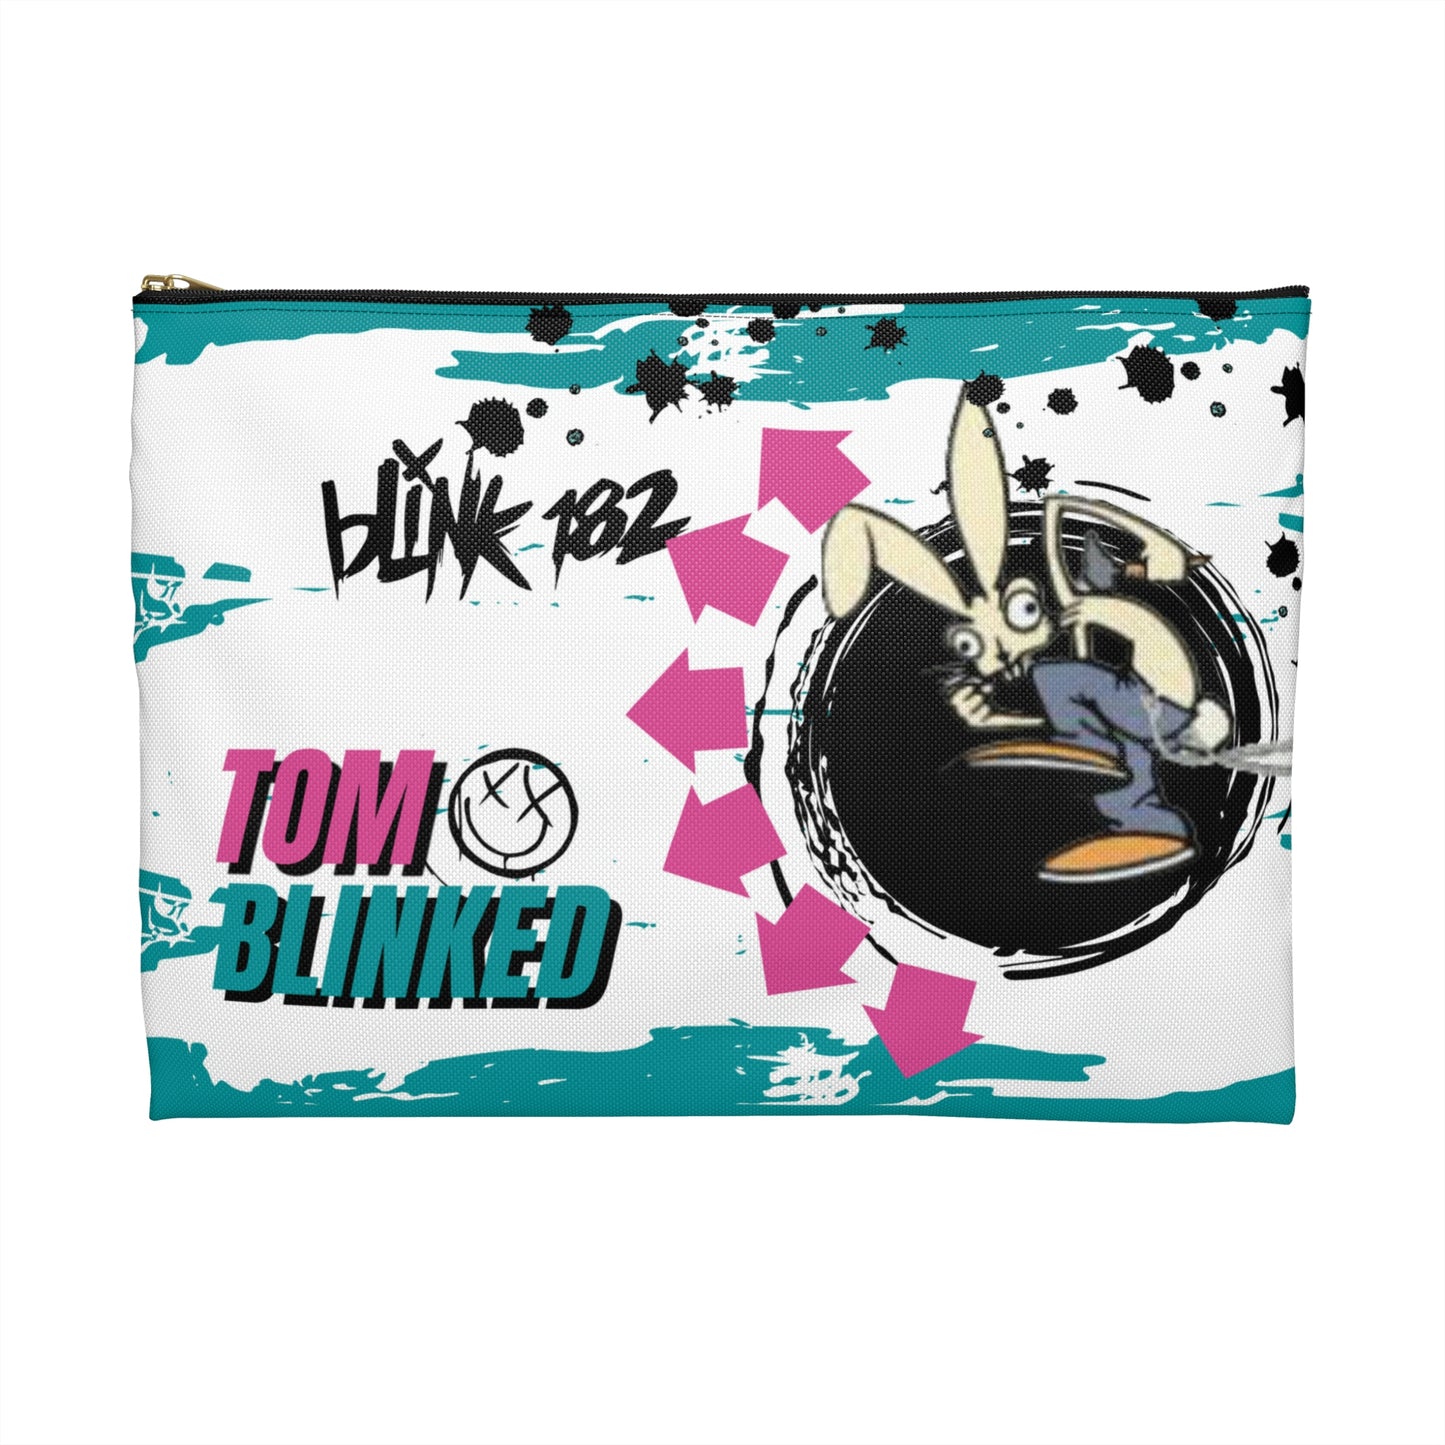 Blink 182 Accessory Pouch, All the Small Things